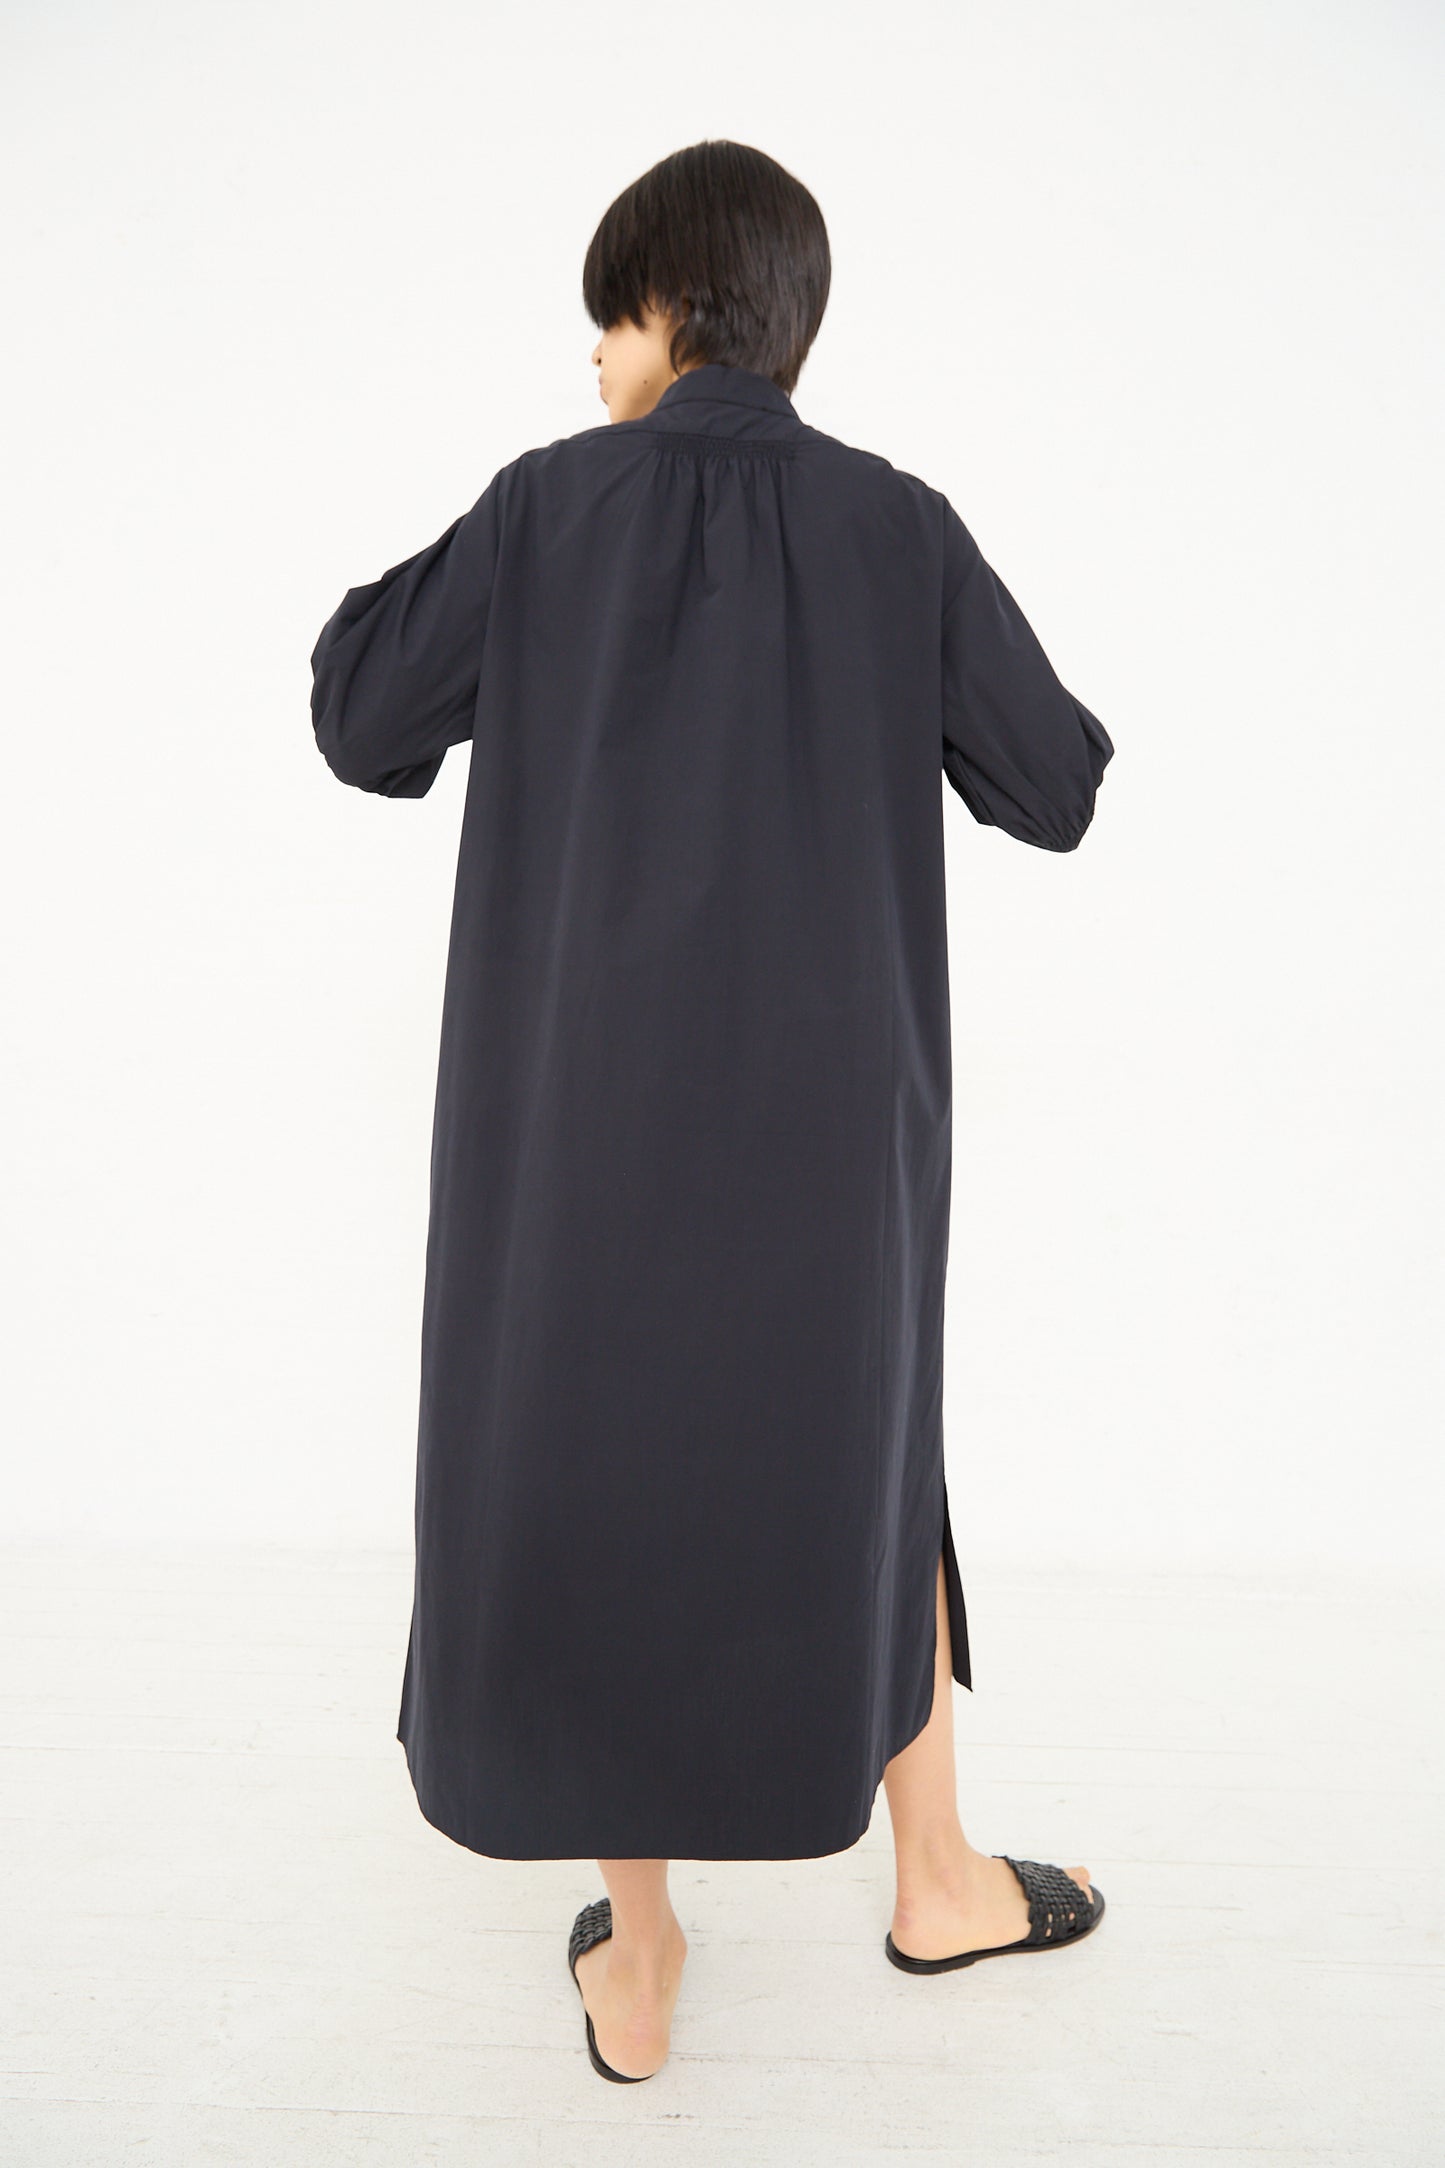 A person seen from behind wearing a Knoll Shirt Dress with Ruched Cuff in Darkest Navy by Studio Nicholson with puffed sleeves and black flats.